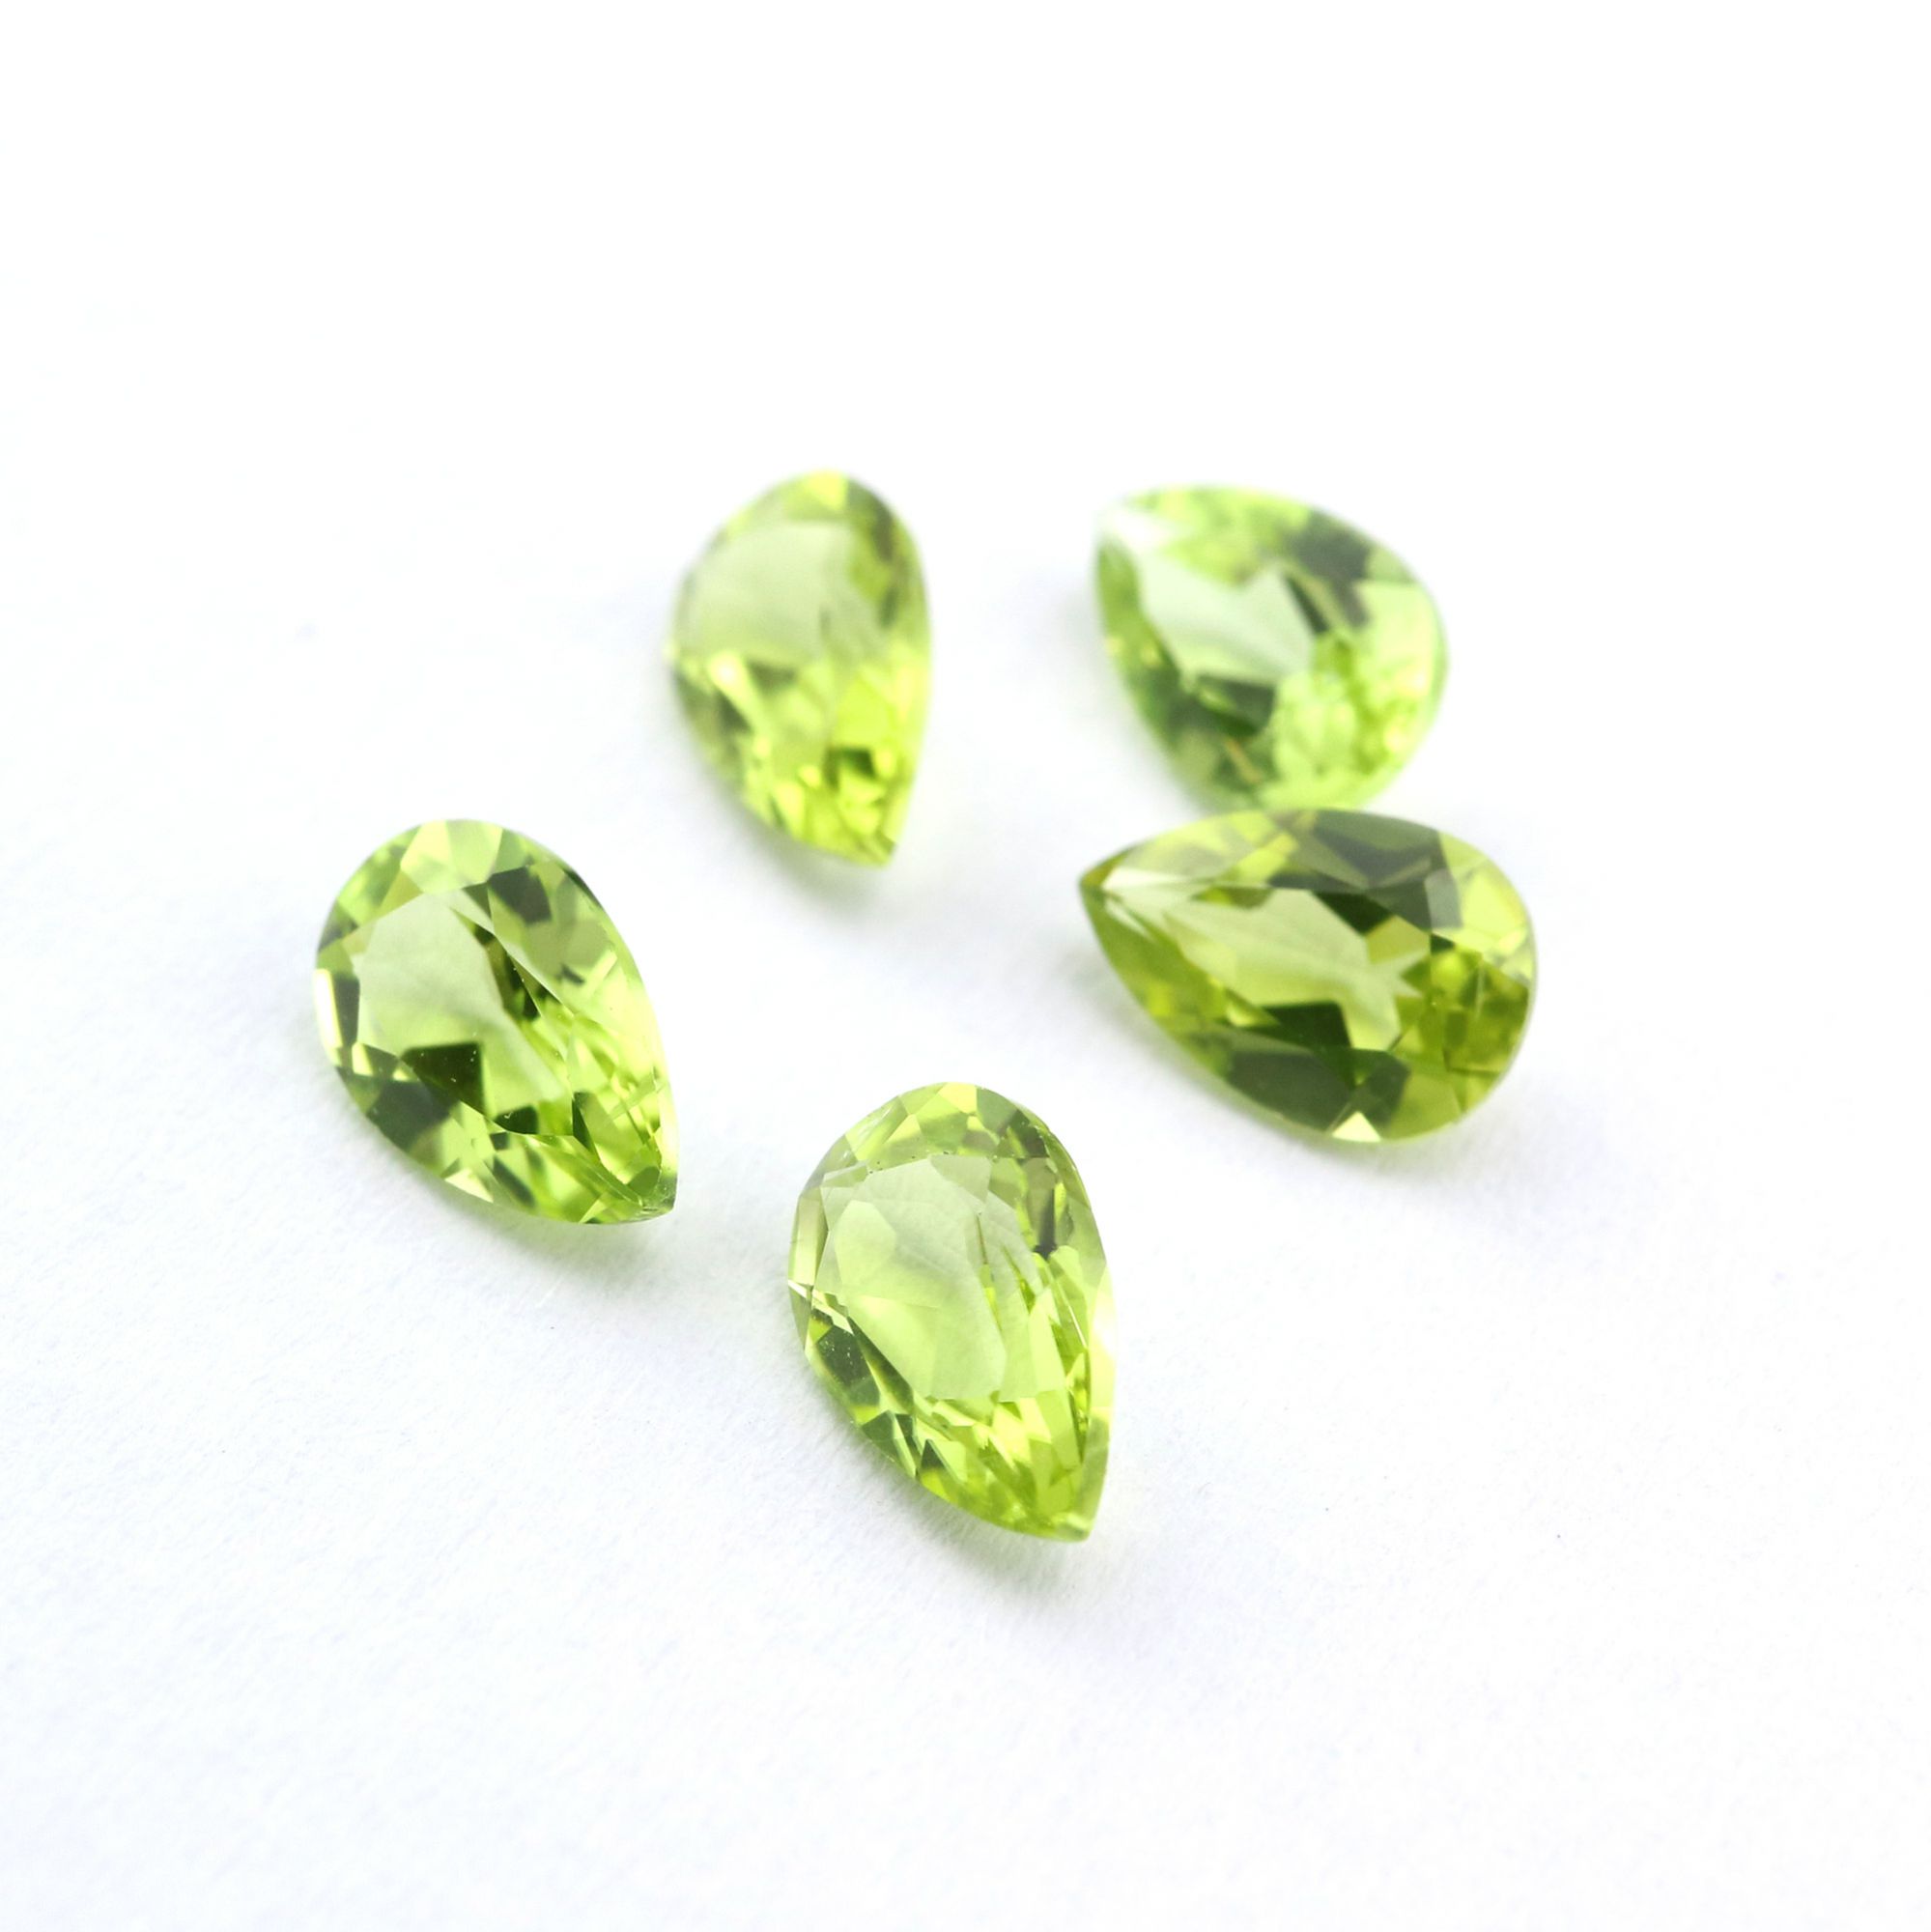 1Pcs Pear Green Peridot August Birthstone Faceted Cut Loose Gemstone Natural Semi Precious Stone DIY Jewelry Supplies 4150006 - Click Image to Close